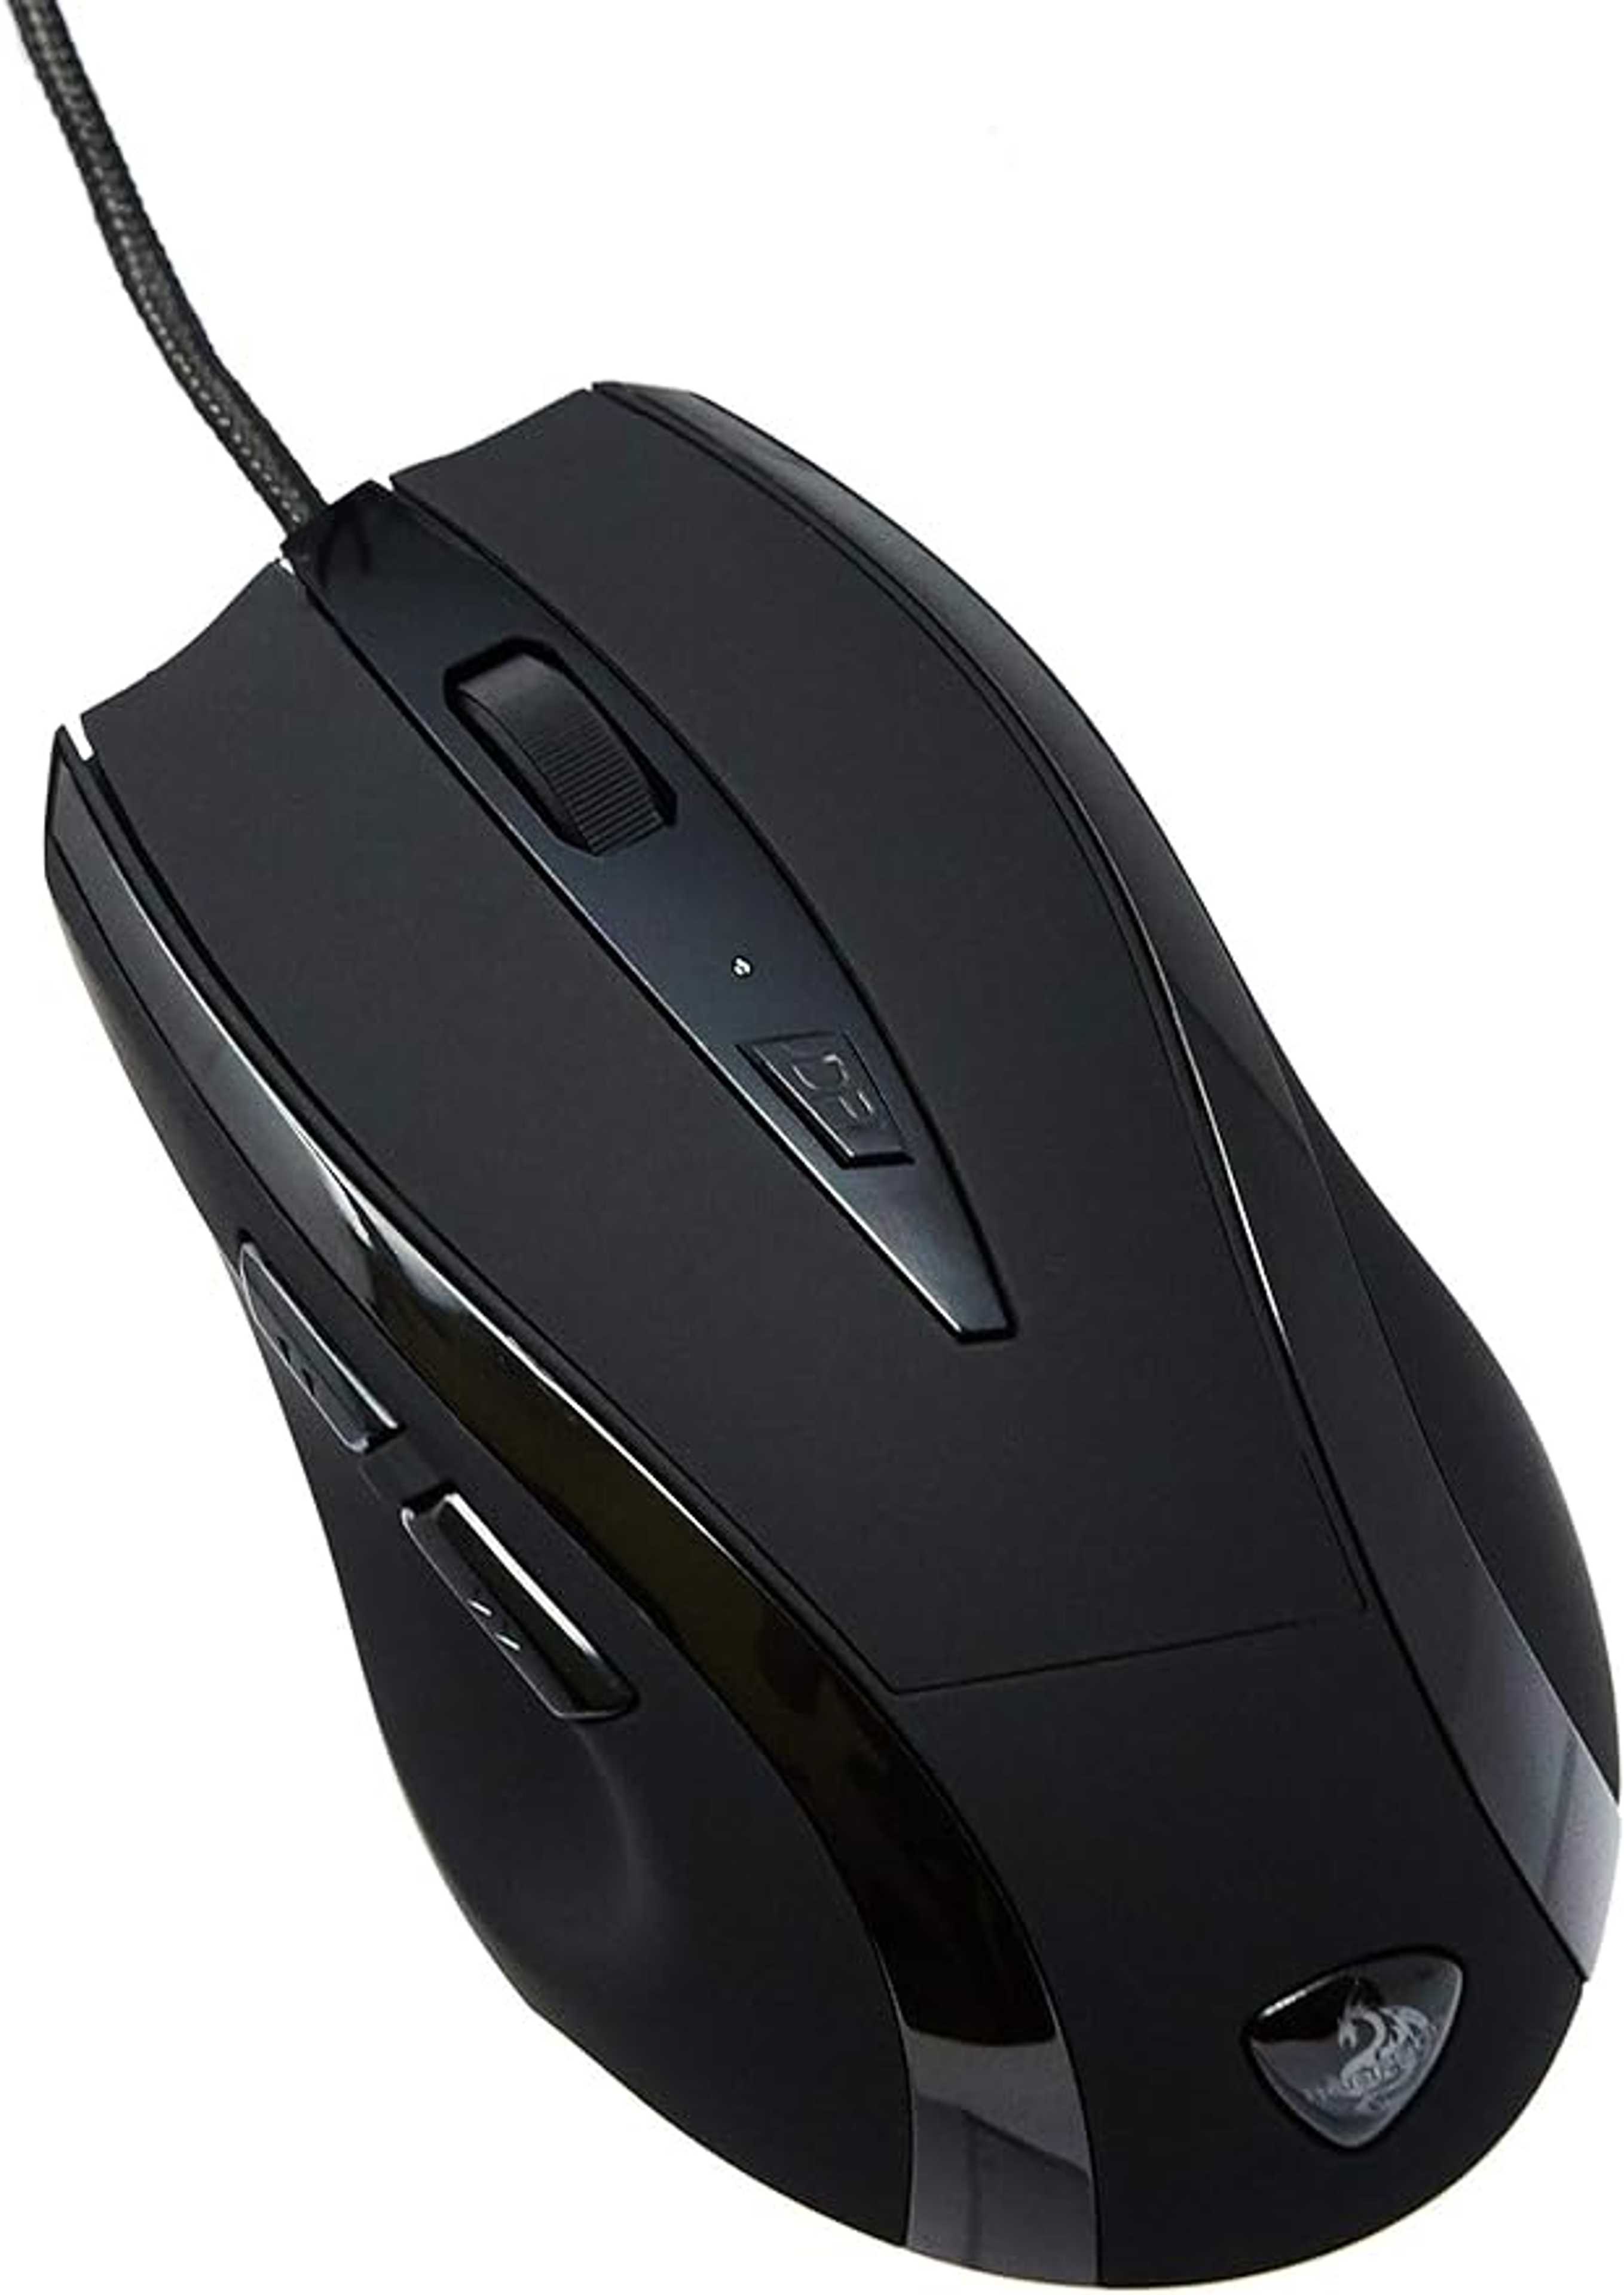 Hoopson Kata Mouse Gamer GX18, Avago A3050 Sensor, RGB, Programmable, Omron Switch, 4000 DPI- 1000hz Polling rate- Software Customization